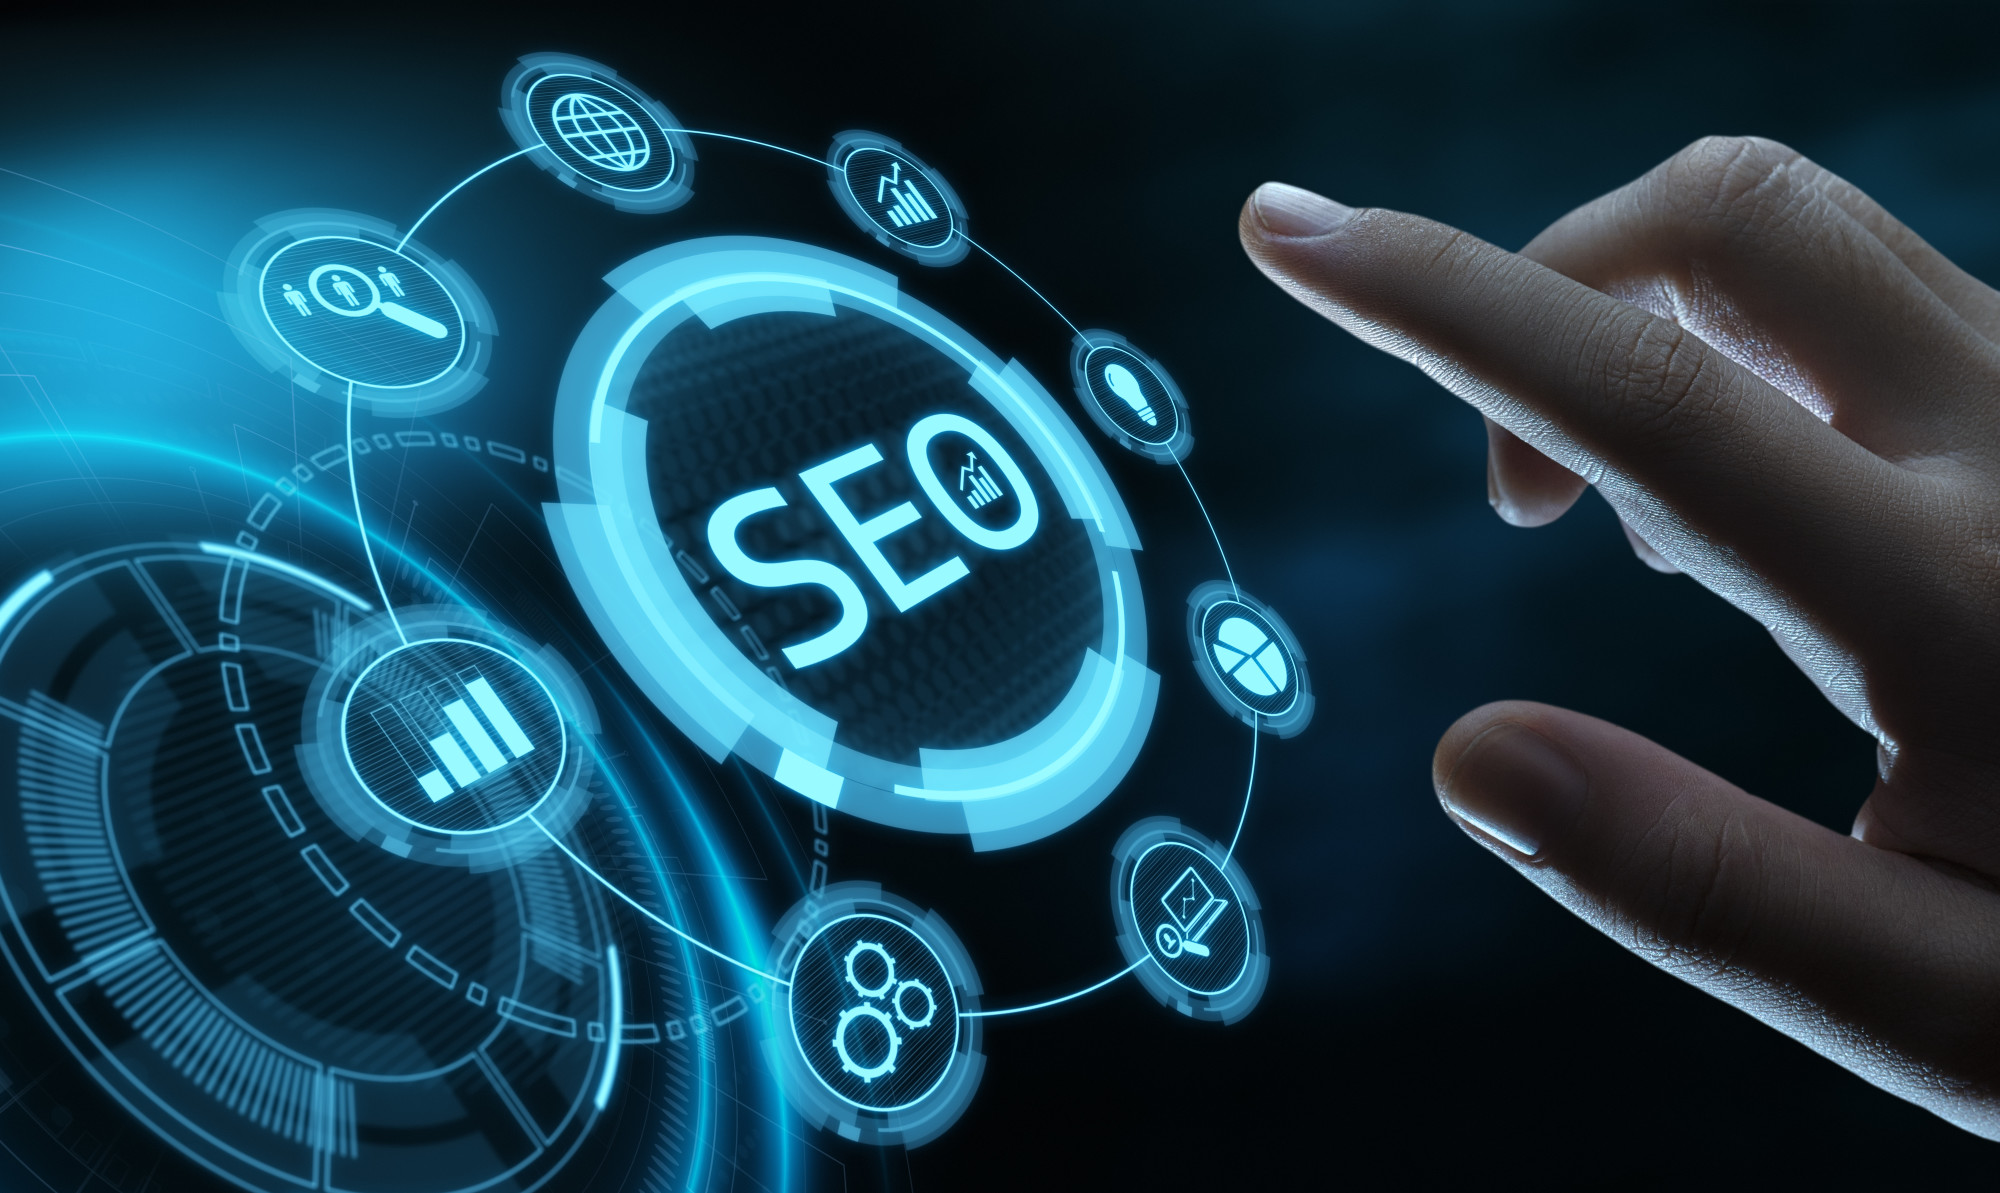 The Top 11 SEO Trends to Watch Out for in 2023